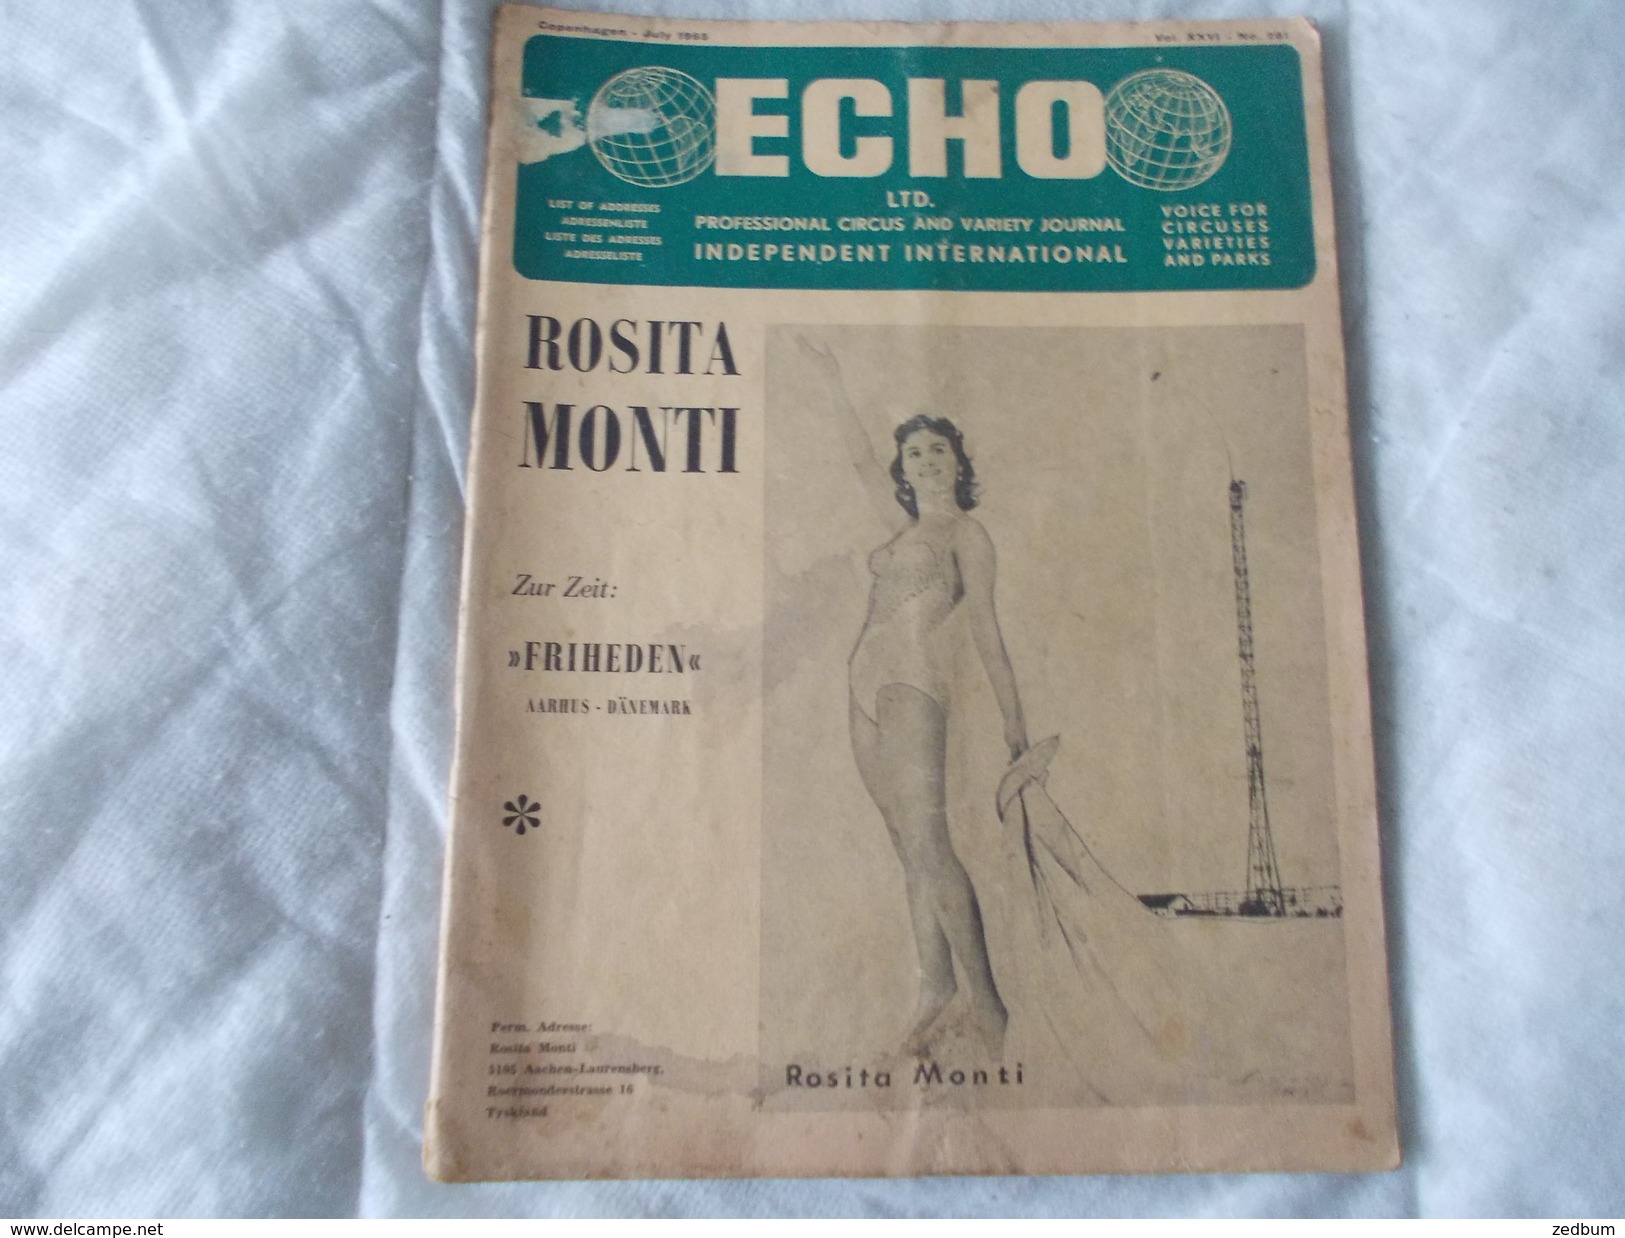 ECHO LTD Professional Circus And Variety Journal Independent International N° 281 July 1965 - Amusement